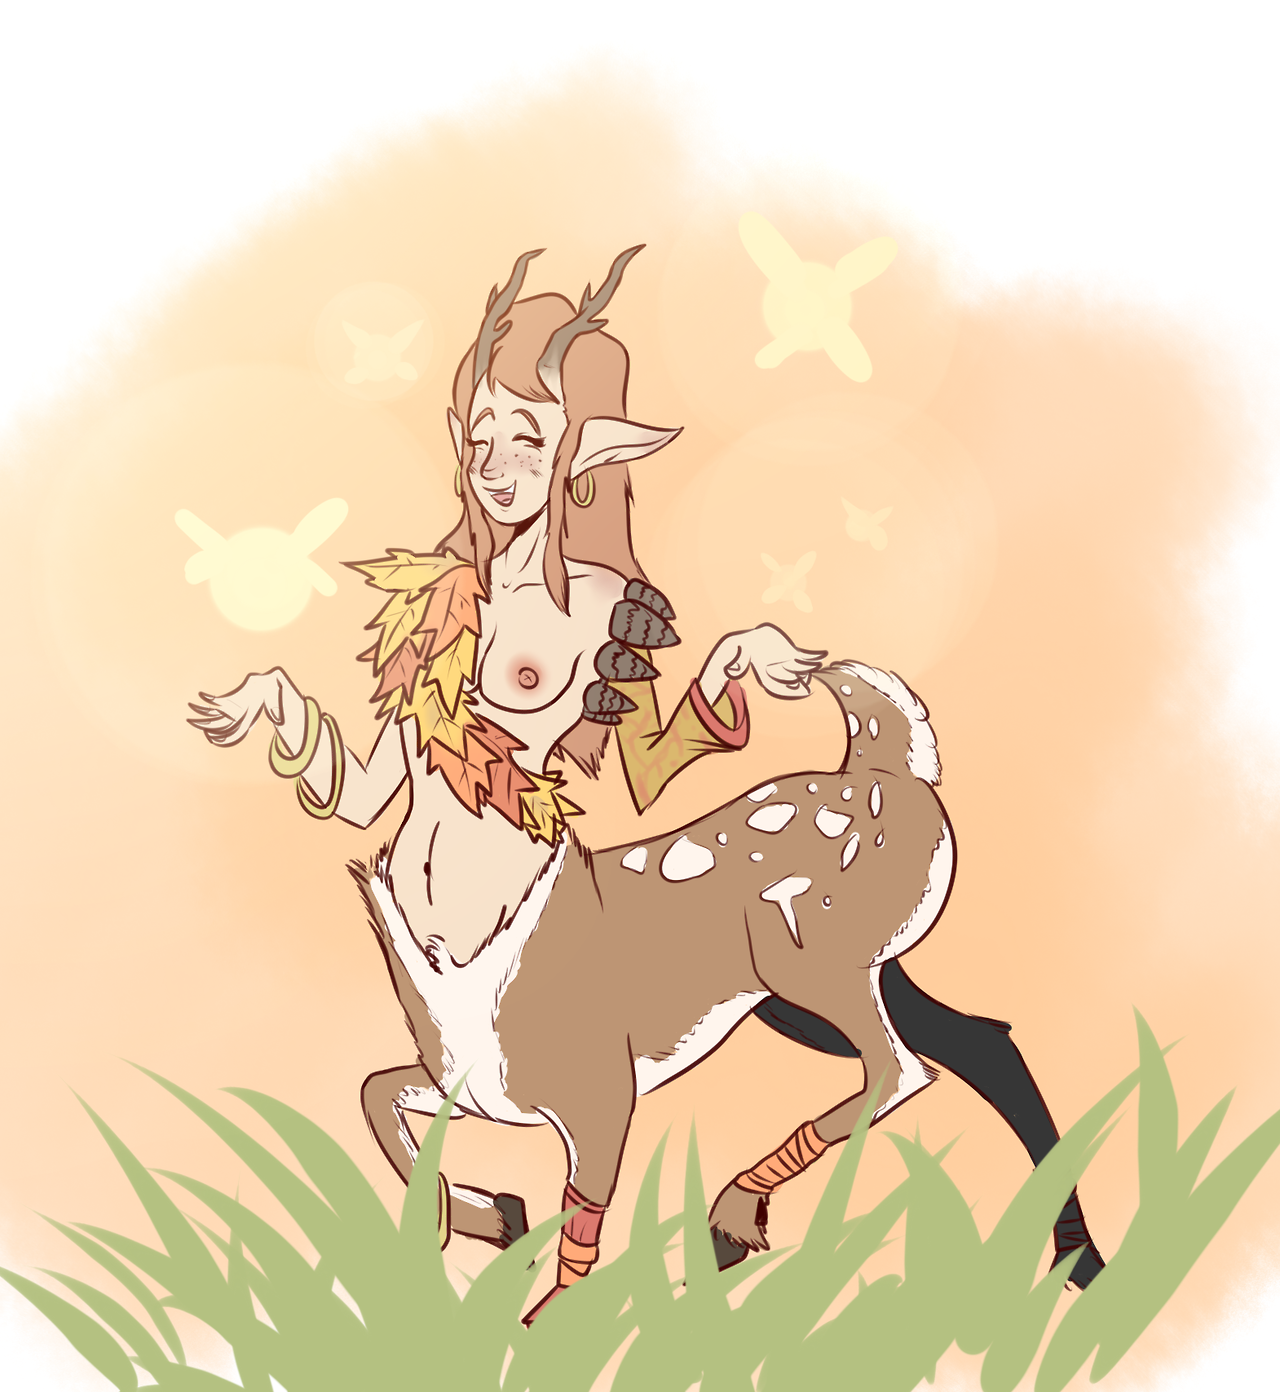 A sketch of everyone’s favorite doe prancing along in the autumn to celebrate the